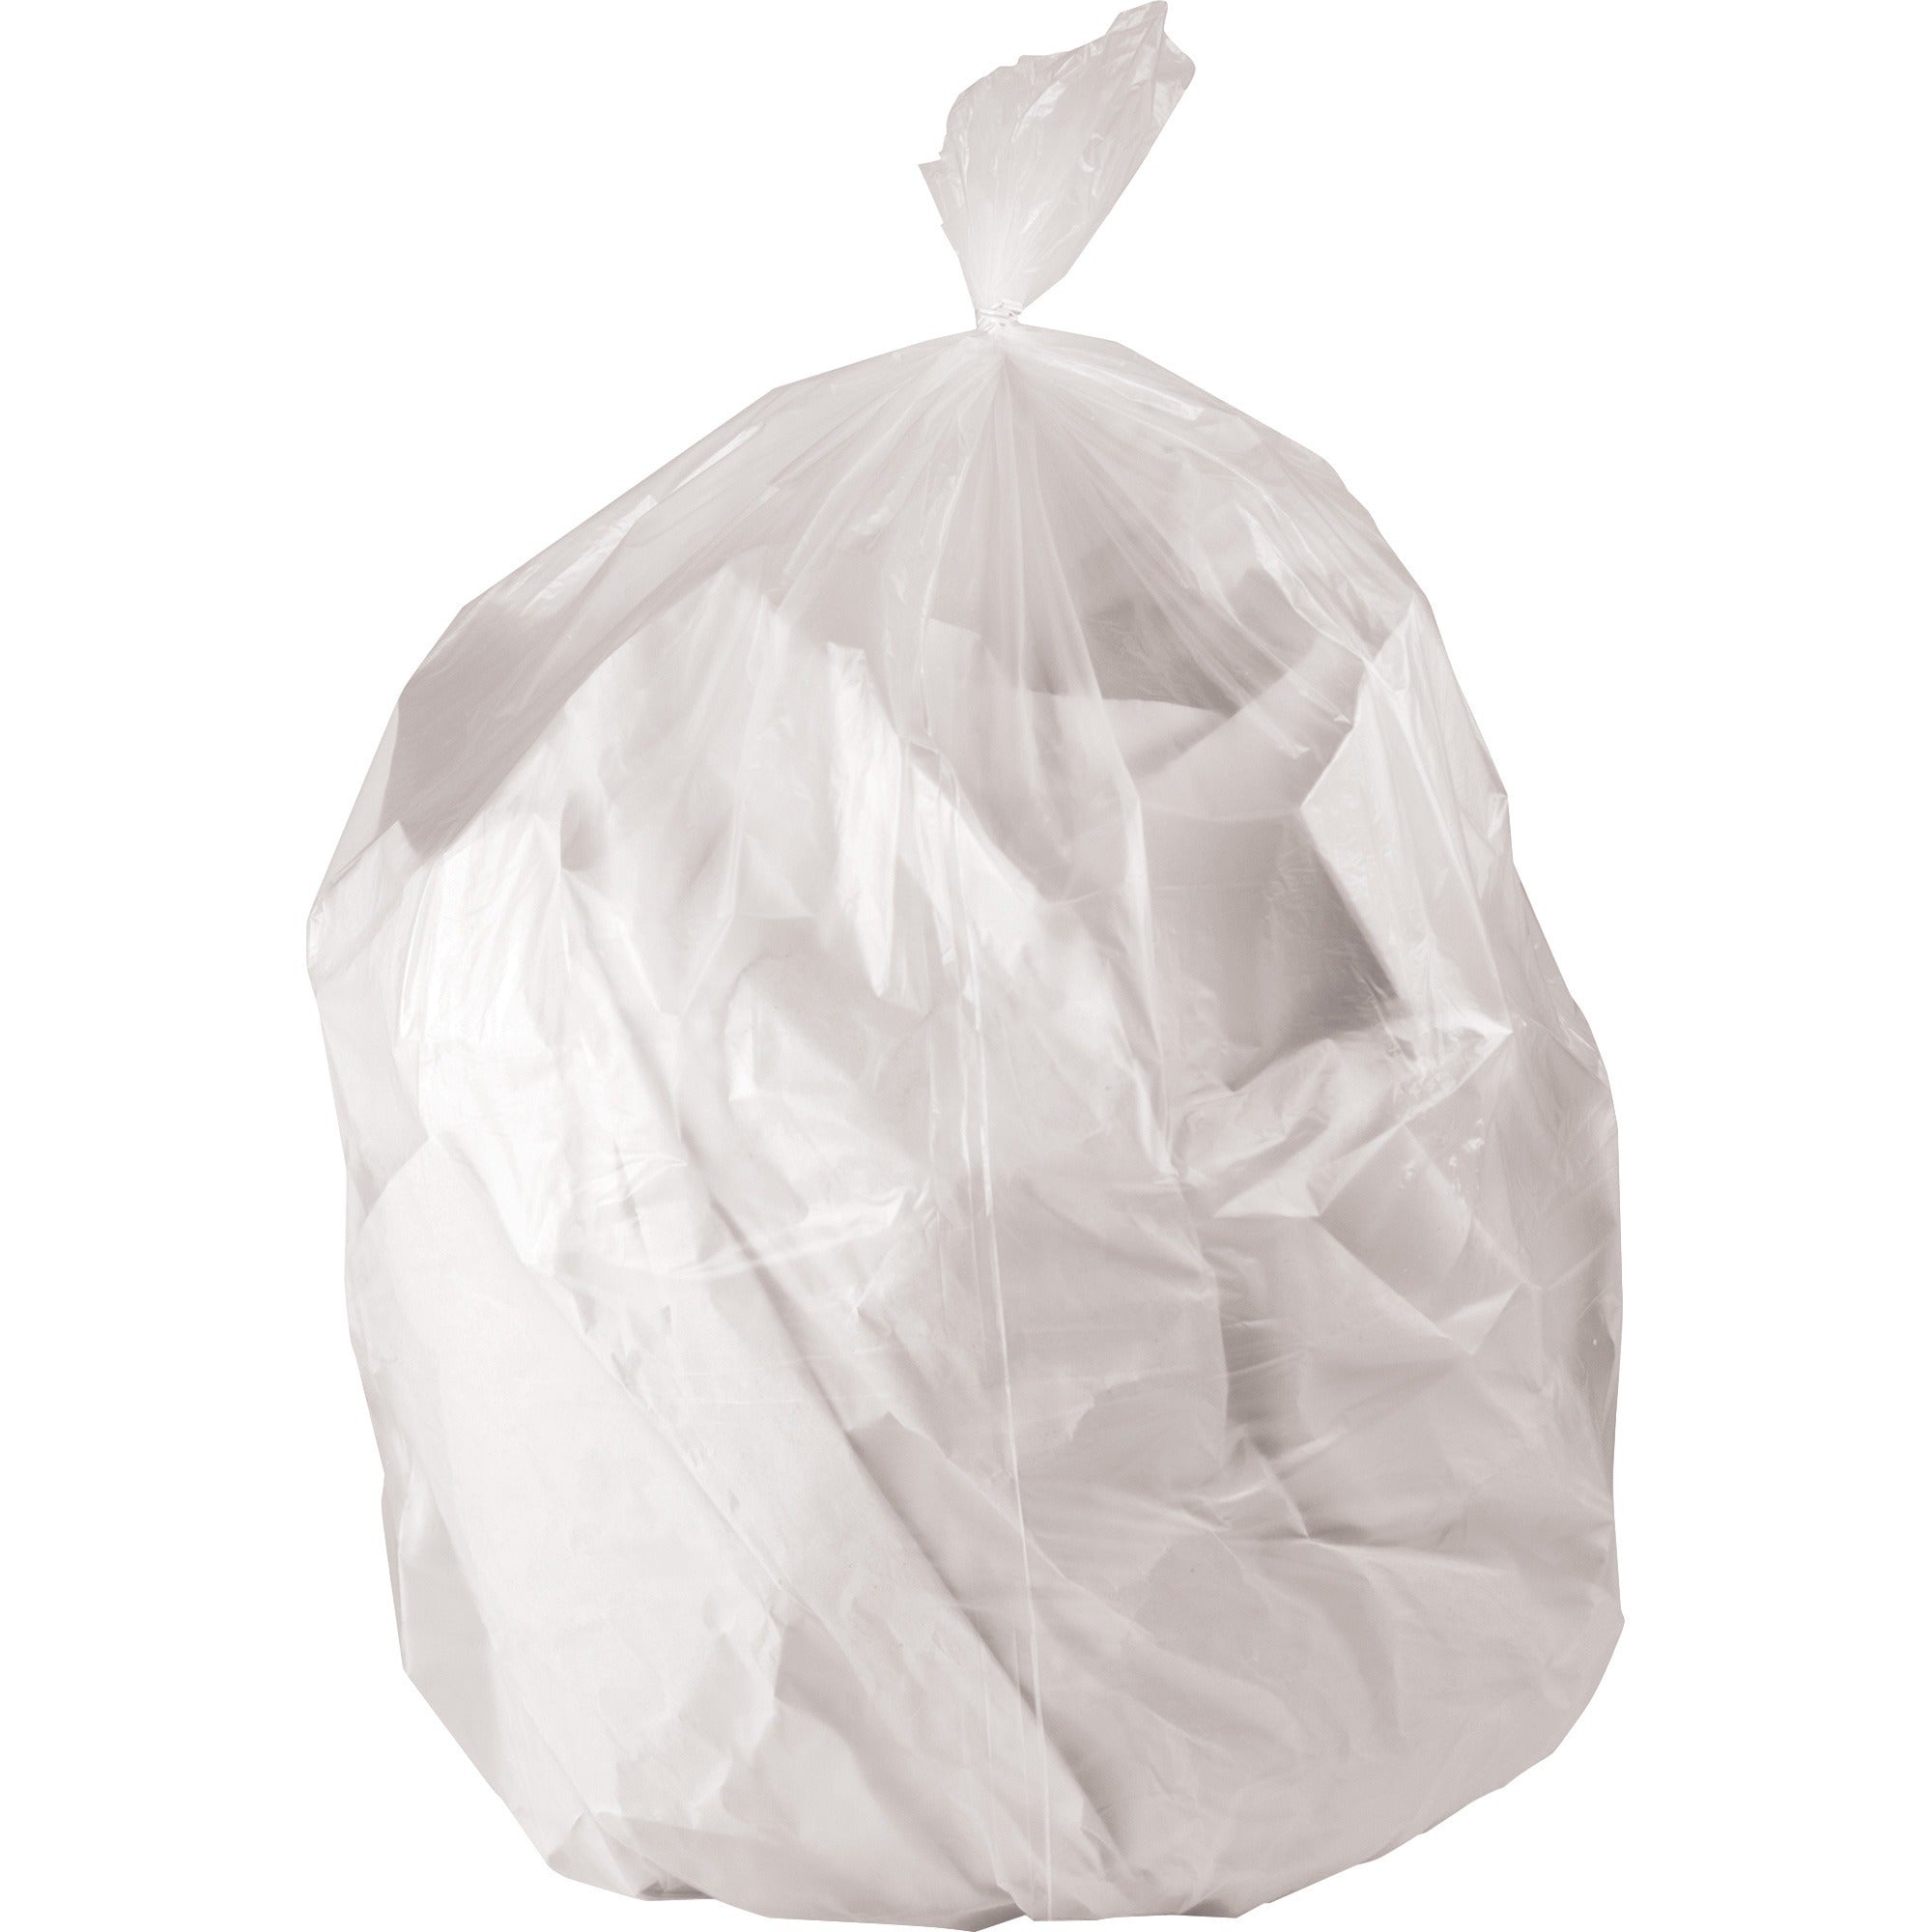 genuine-joe-strong-economical-trash-bags-45-gal-capacity-40-width-x-48-length-051-mil-13-micron-thickness-clear-resin-250-carton-waste-disposal_gjo02856 - 1